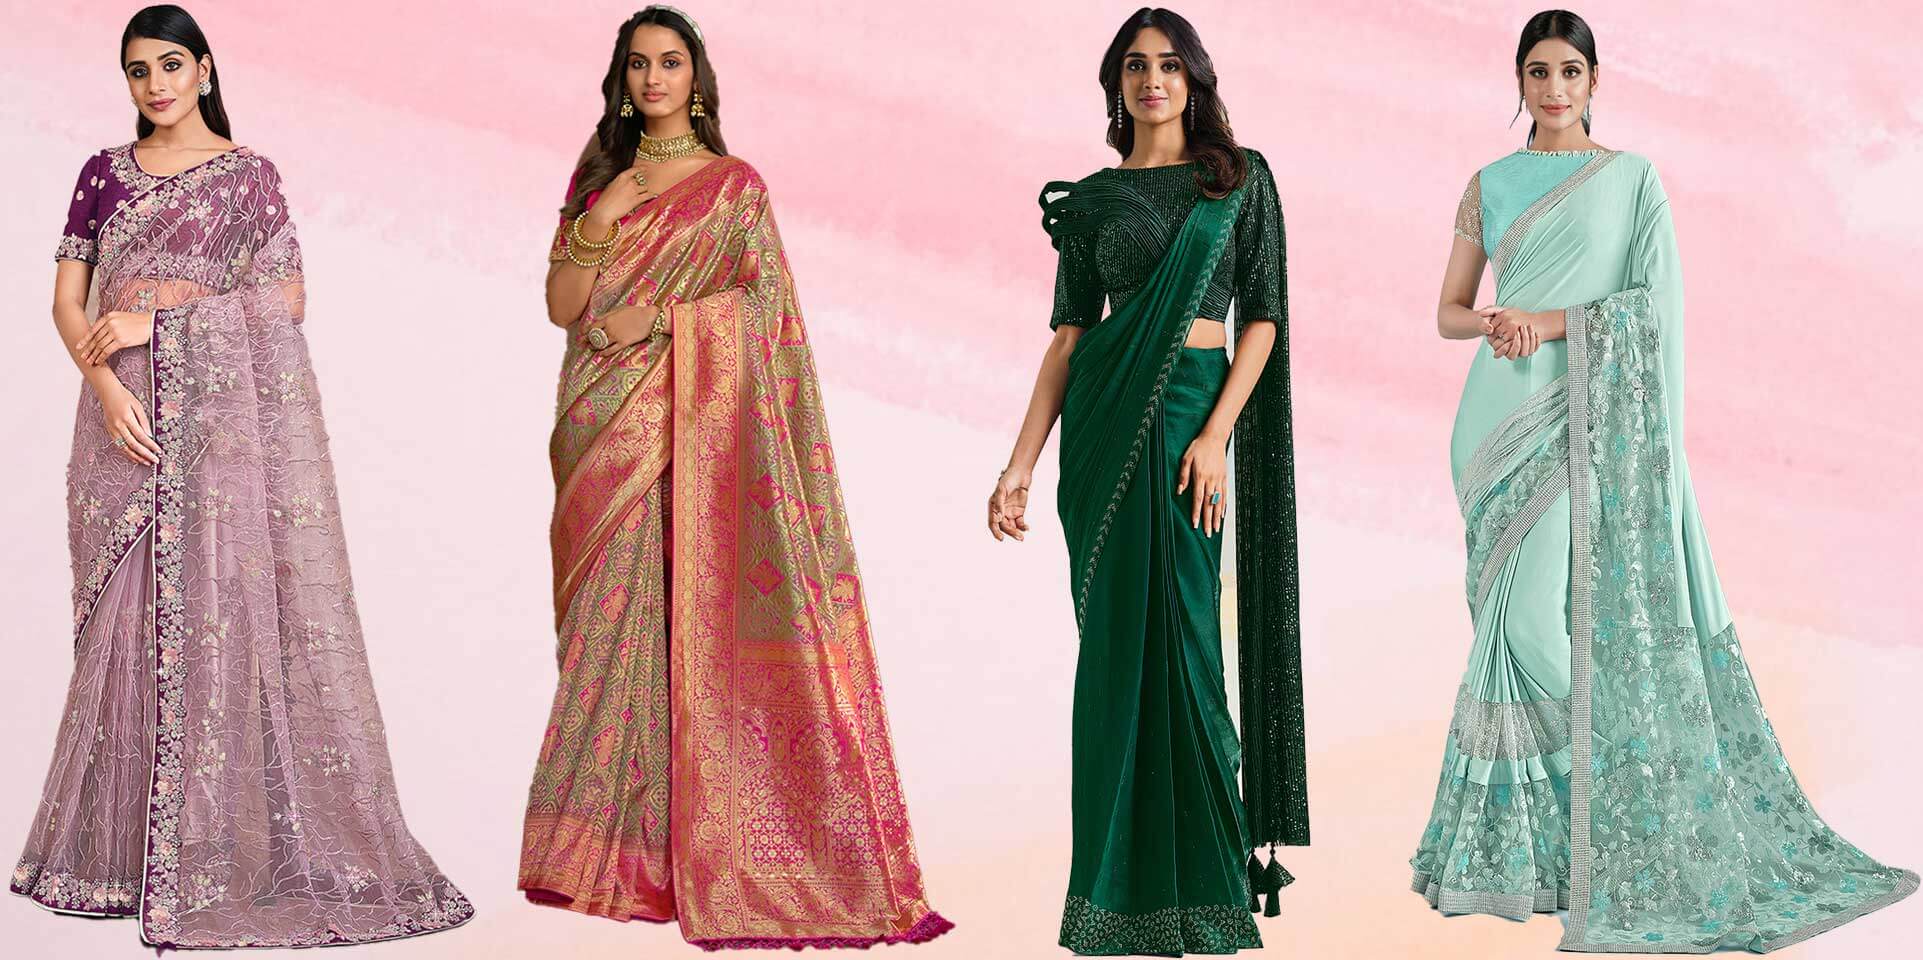 How to choose the perfect saree for your wedding functions?